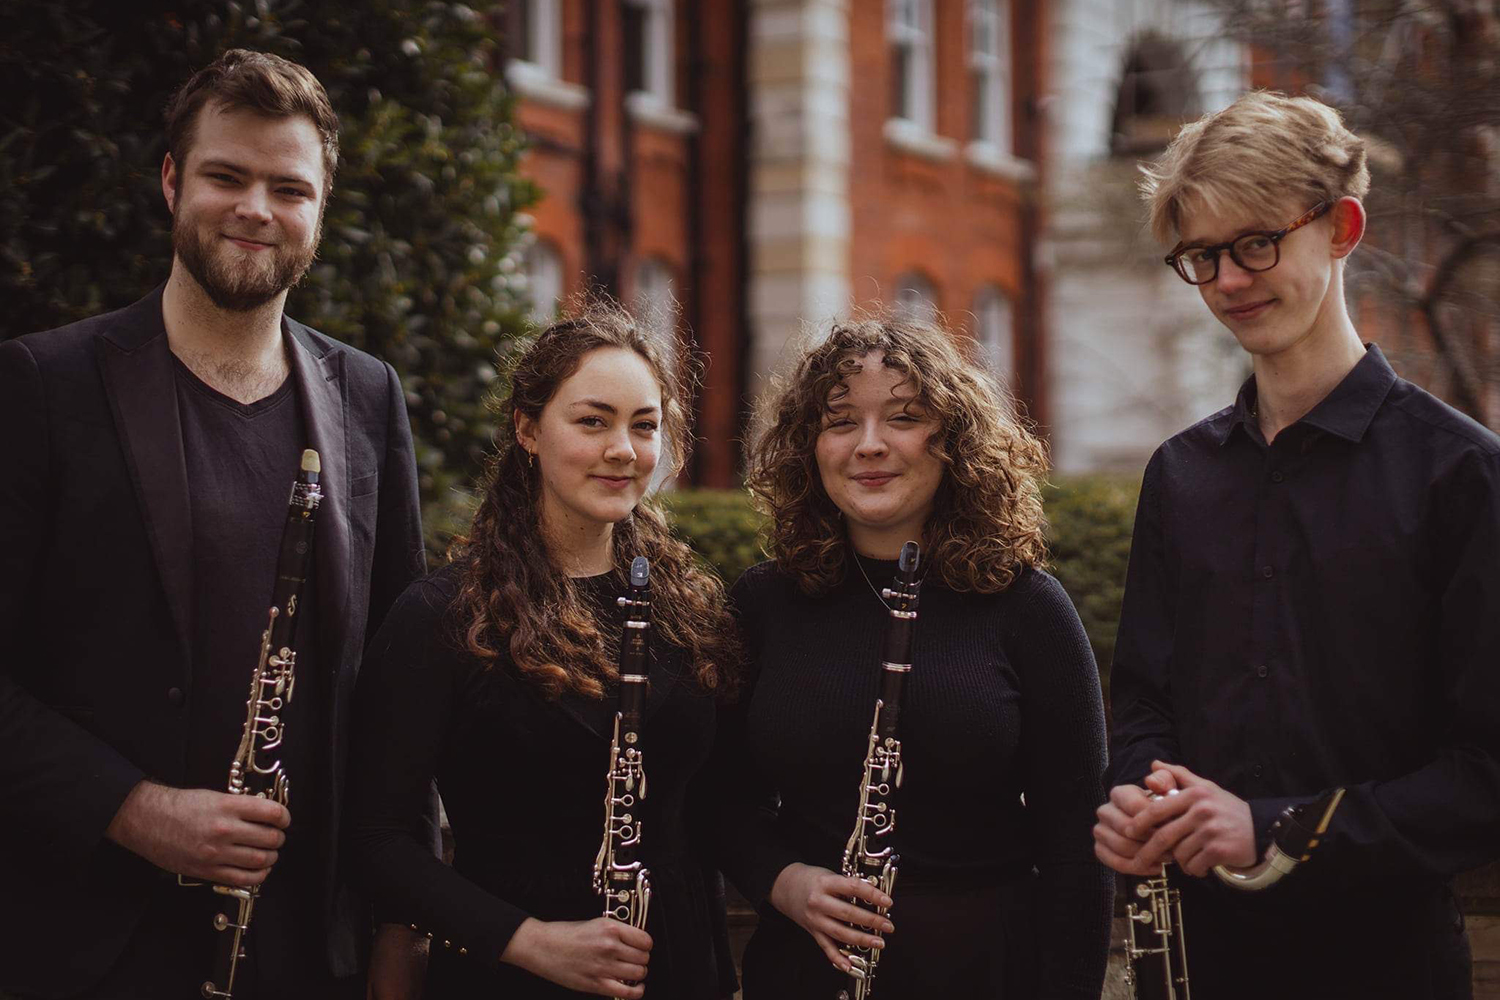 Four musicians wearing black and holding clarinets